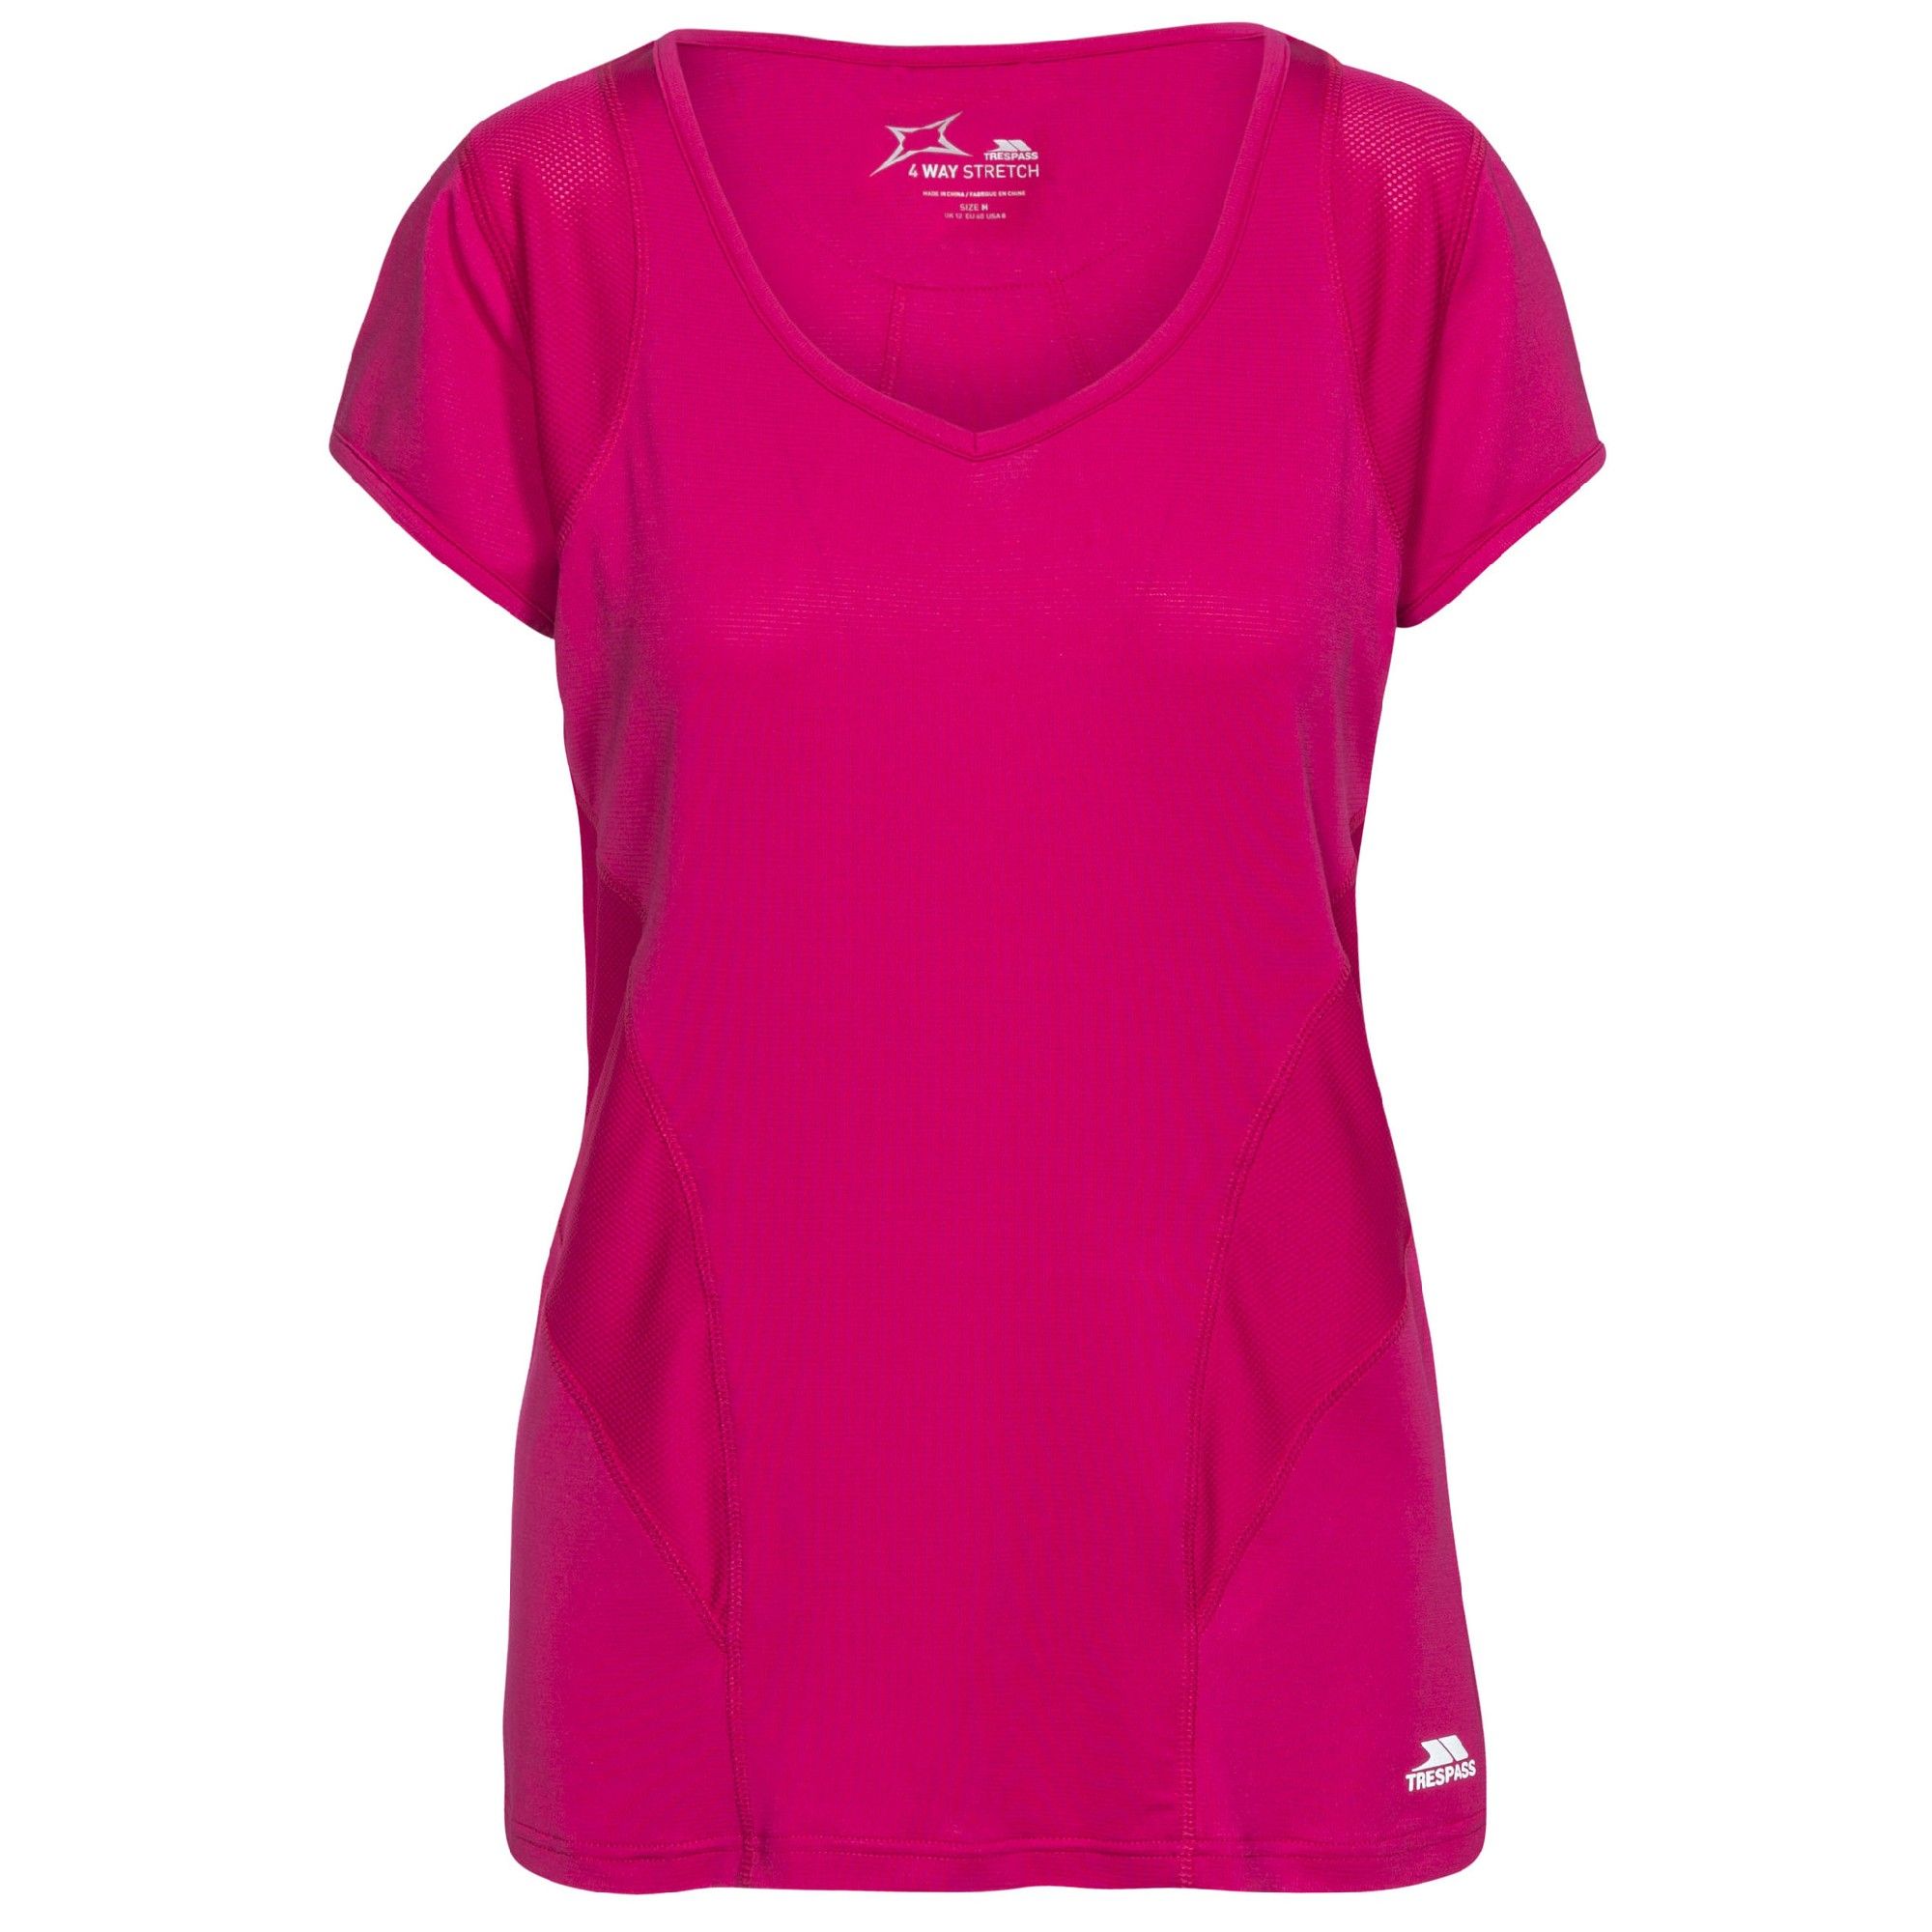 Short sleeves. V-neck. Ventilation panels. Reflective prints. Wicking. Quick dry. 4-way stretch. Main: 90% Polyester/10% Elastane, Mesh panels: 100% Polyester. Trespass Womens Chest Sizing (approx): XS/8 - 32in/81cm, S/10 - 34in/86cm, M/12 - 36in/91.4cm, L/14 - 38in/96.5cm, XL/16 - 40in/101.5cm, XXL/18 - 42in/106.5cm.